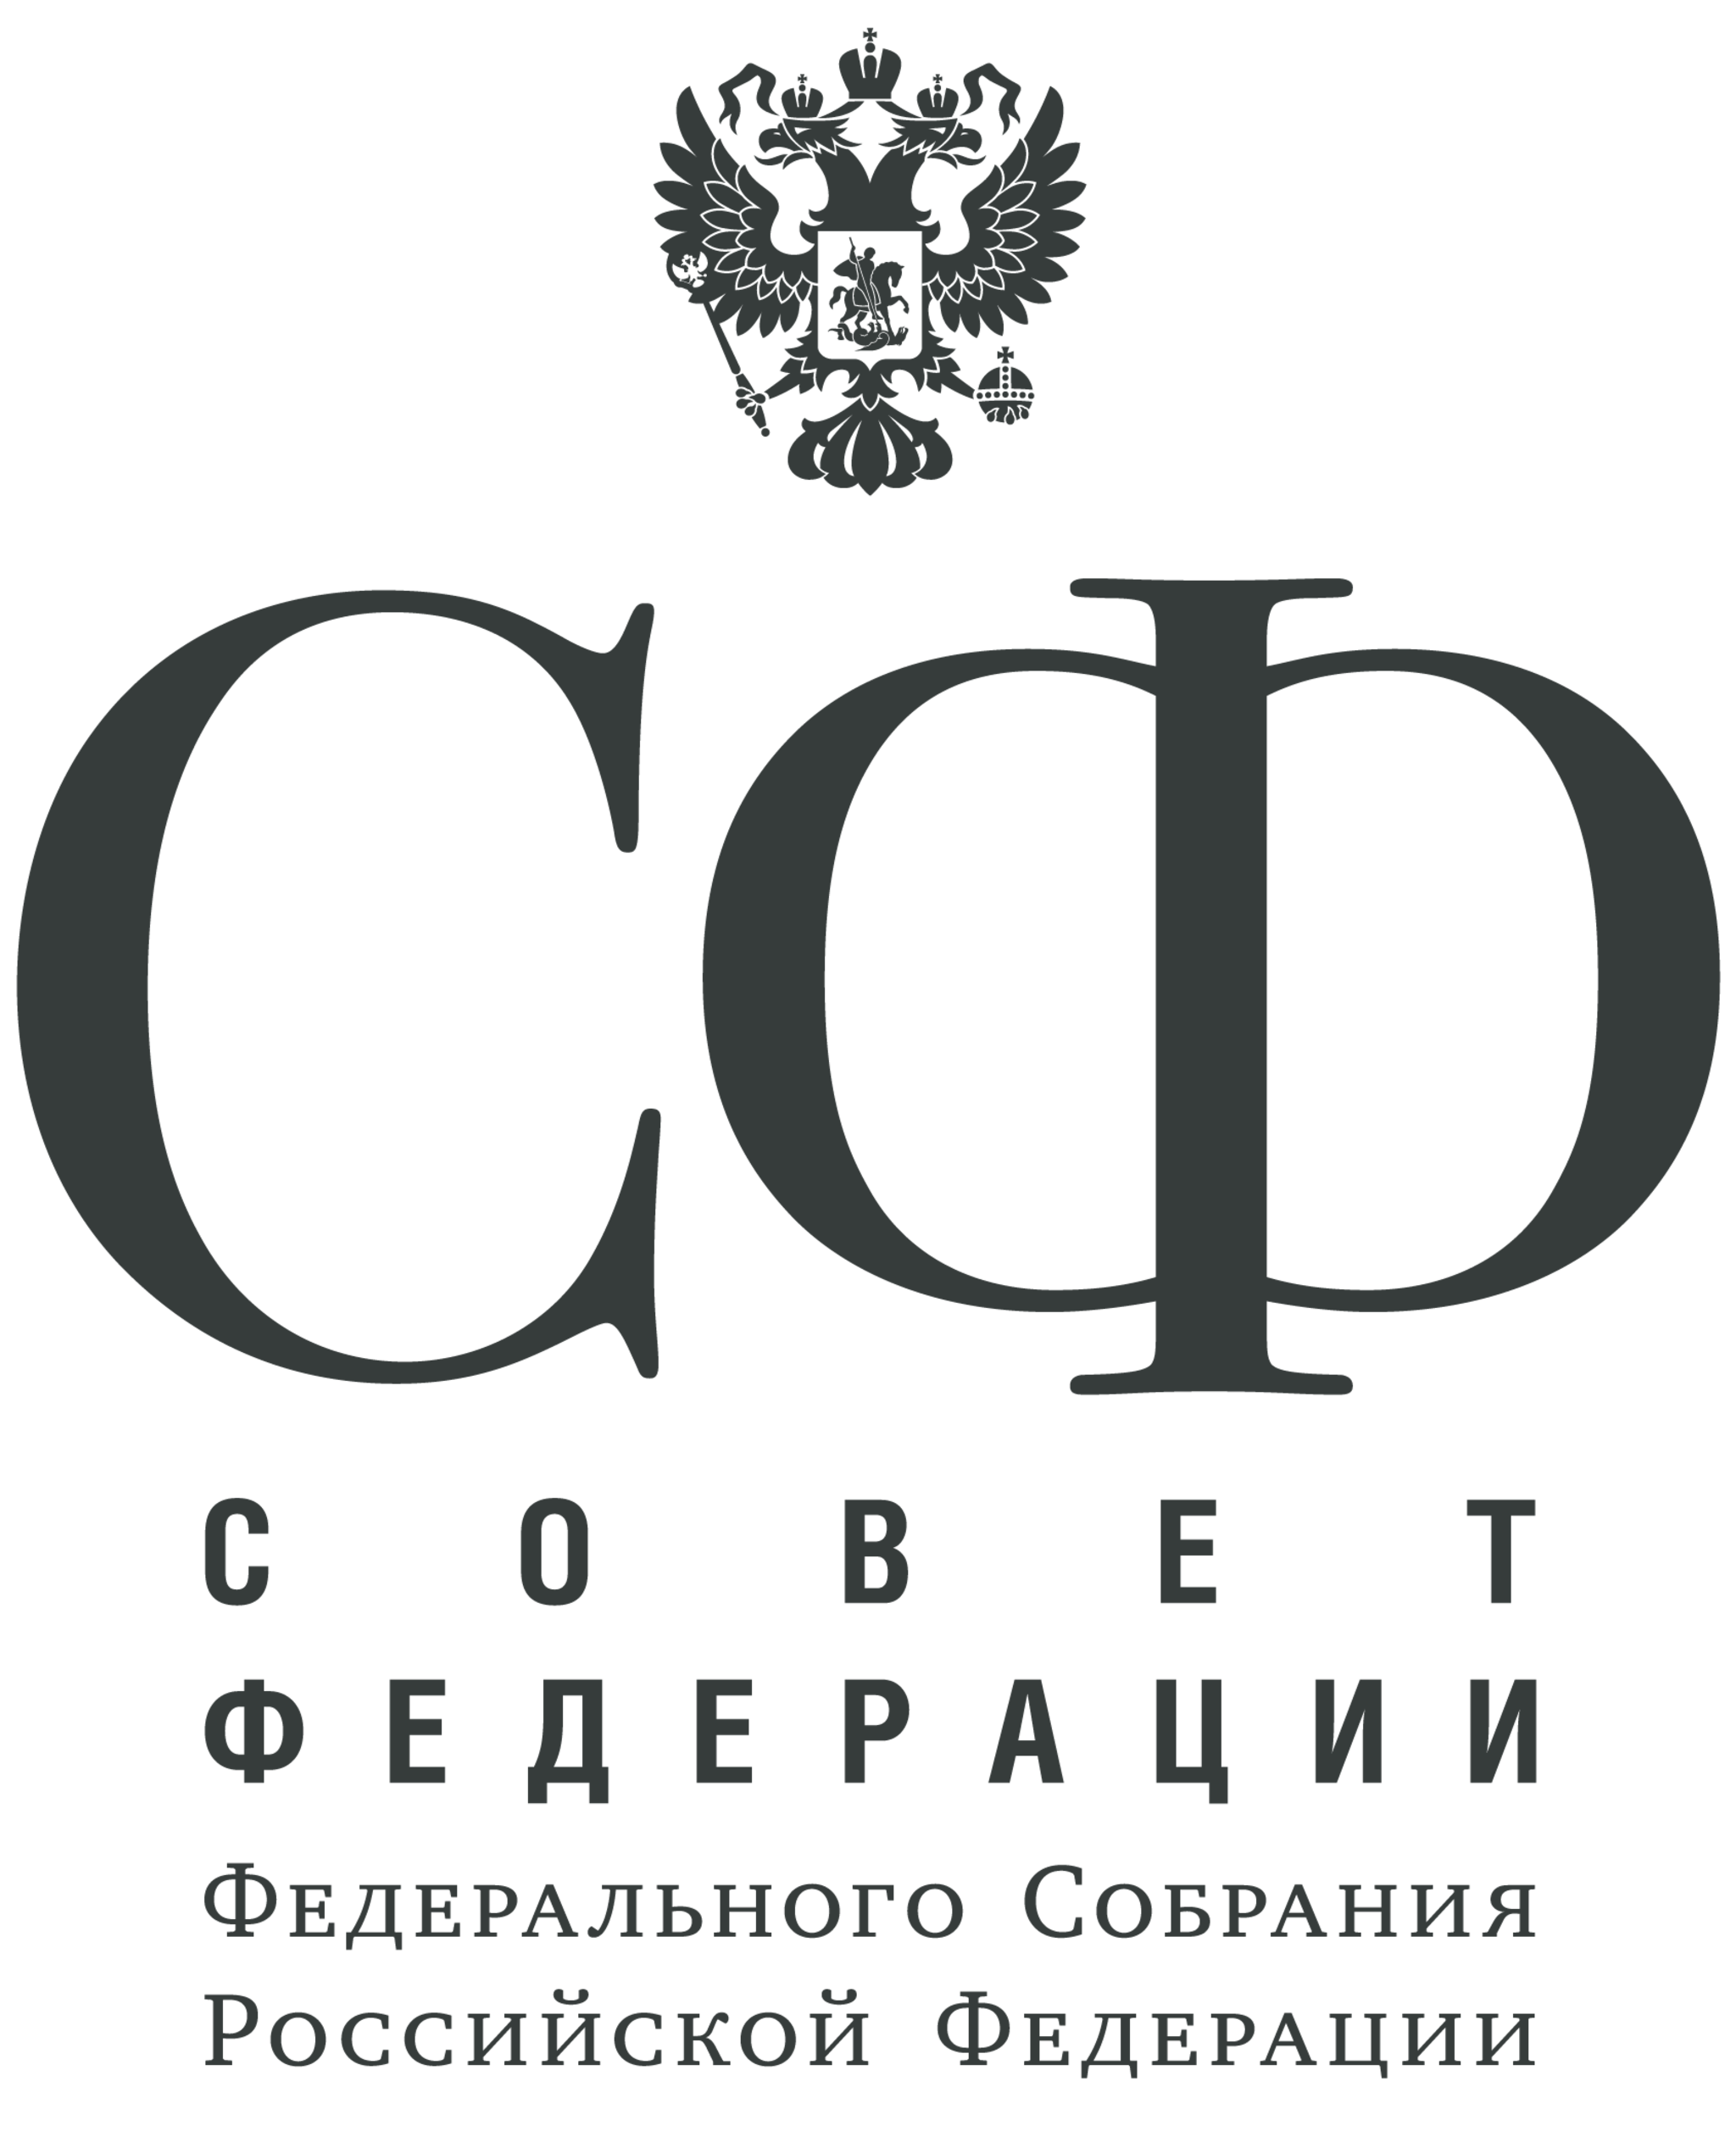 Emblem of the Federation Council of Russia.png